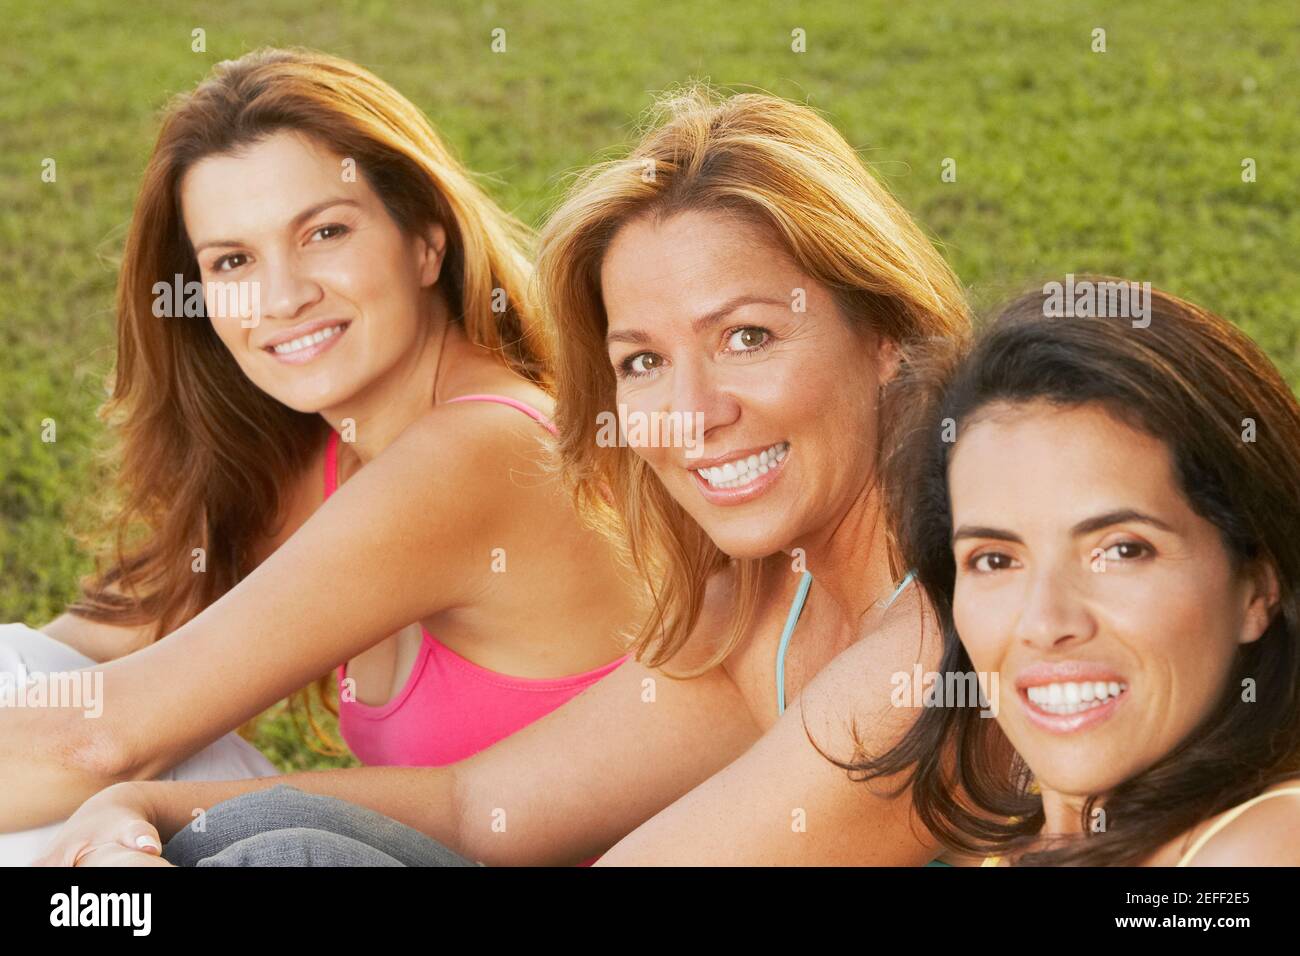 Portrait of two mid adult women and a mature woman smiling Stock Photo